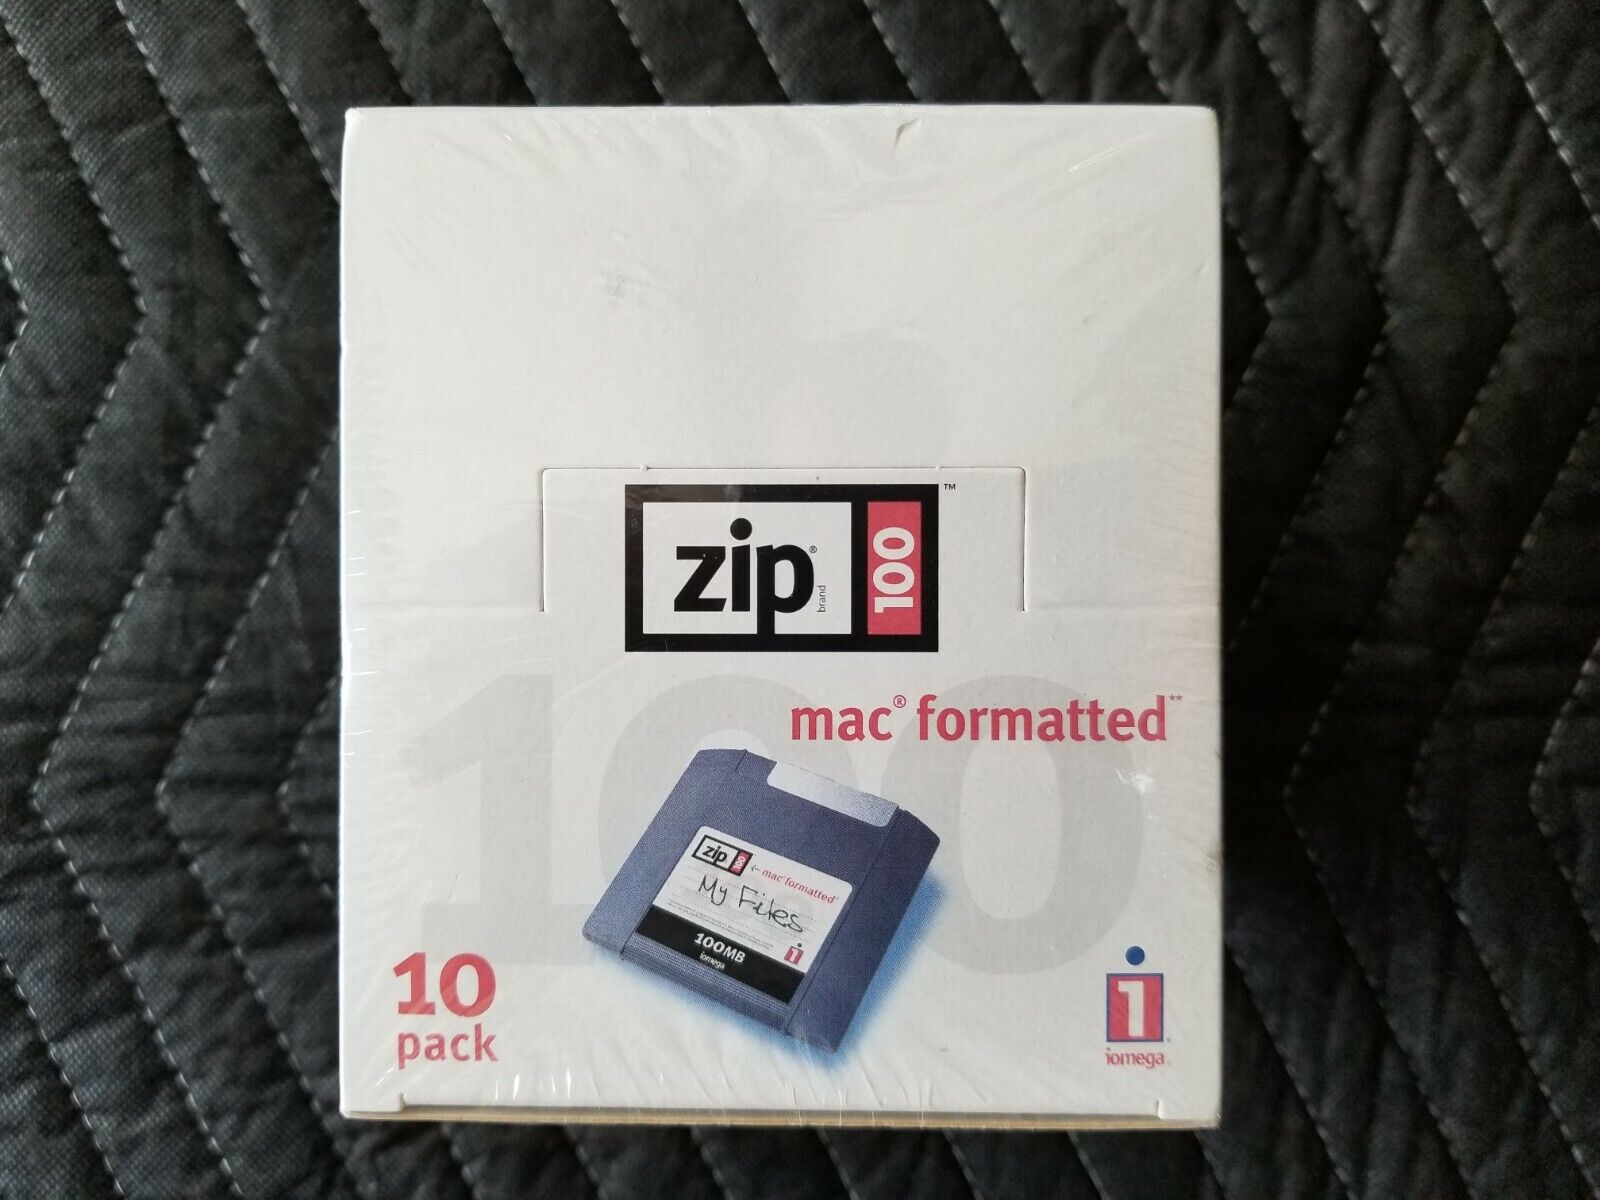 Iomega 100MB Mac Formatted Zip Disk - 10 Pack - Made In Belgium - Brand NEW